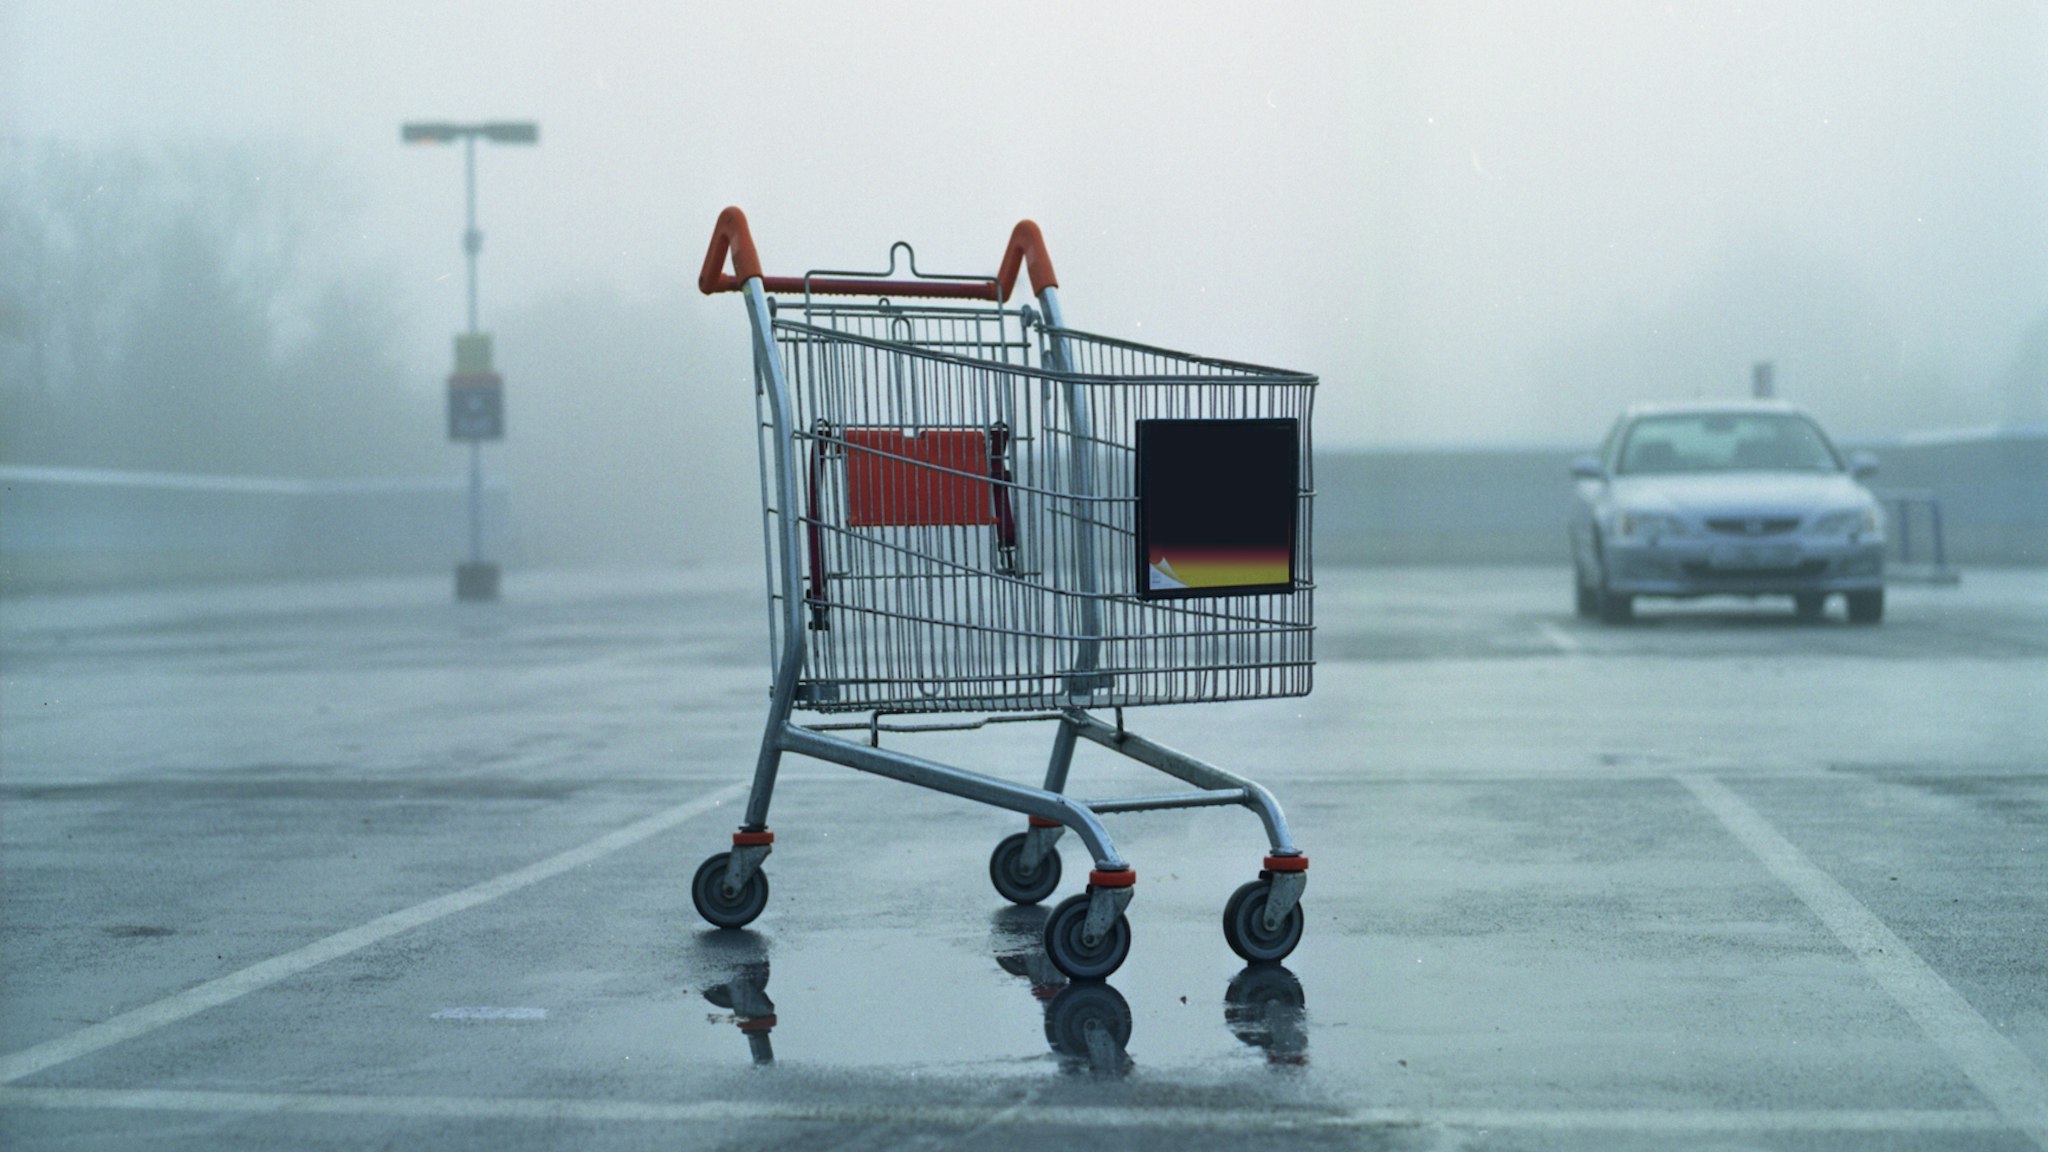 Shopping cart standing in empty parking, misty weather.